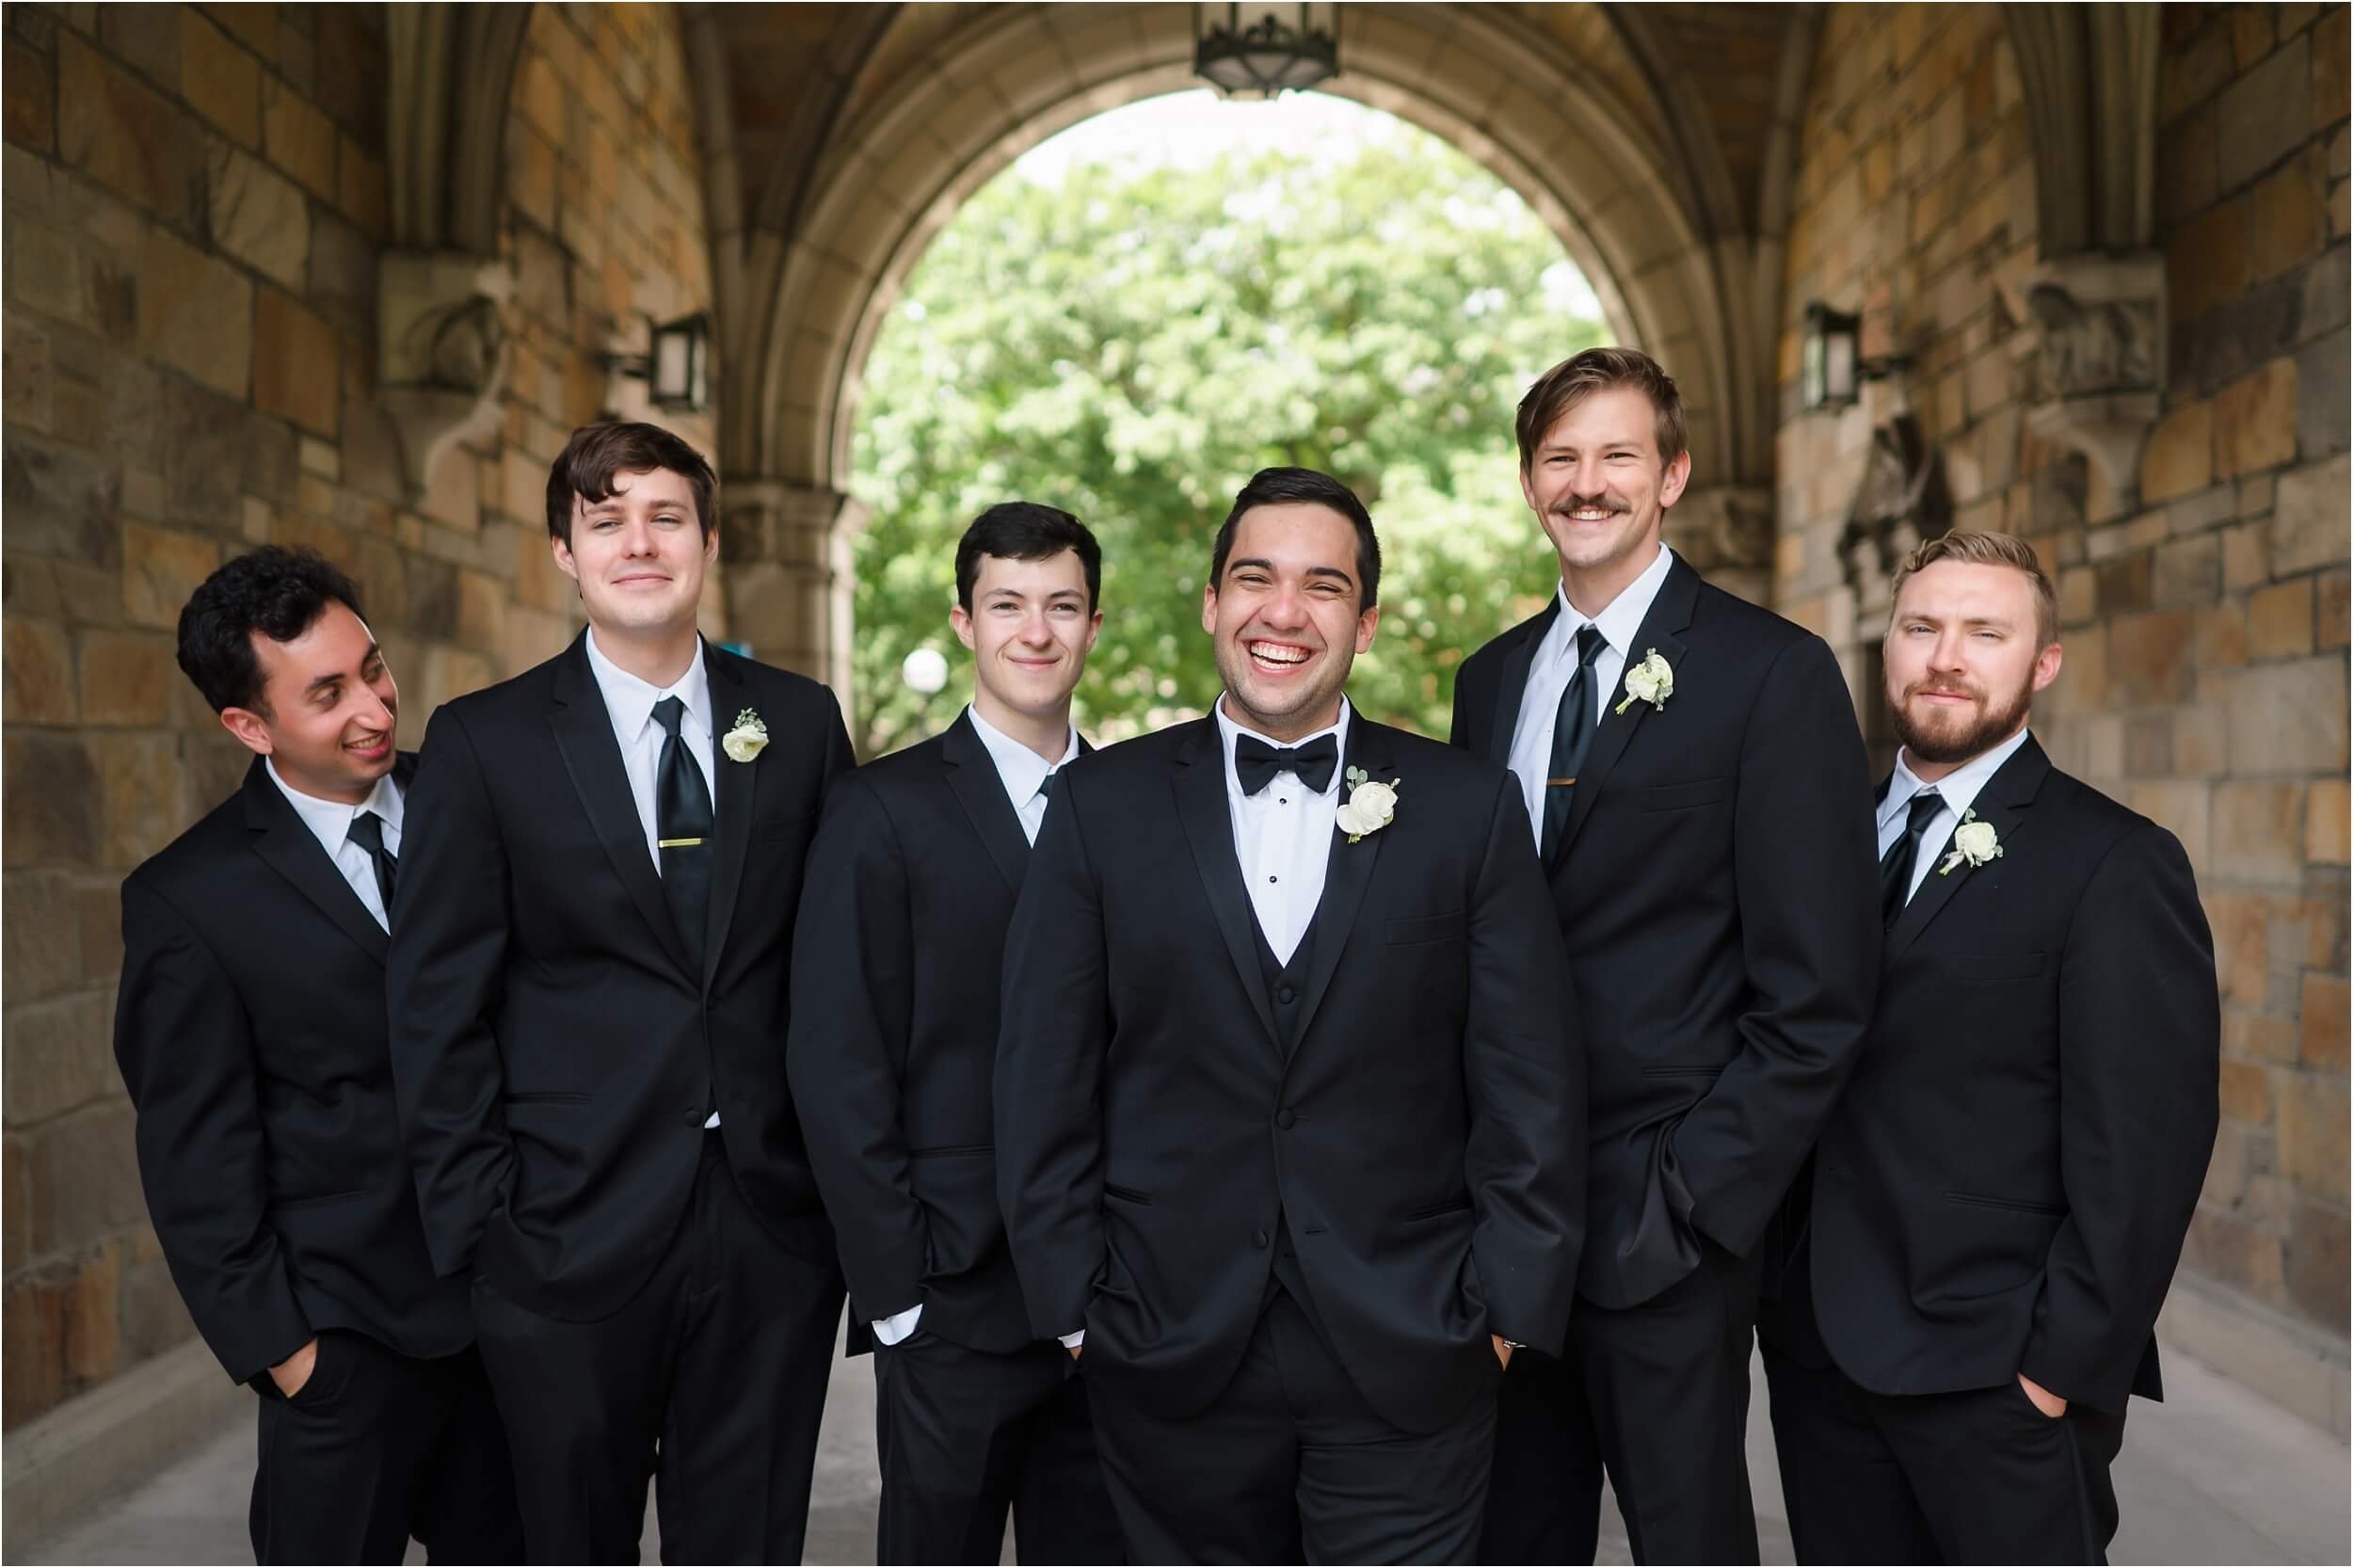  A groom laughs during his portraits after his wedding.  